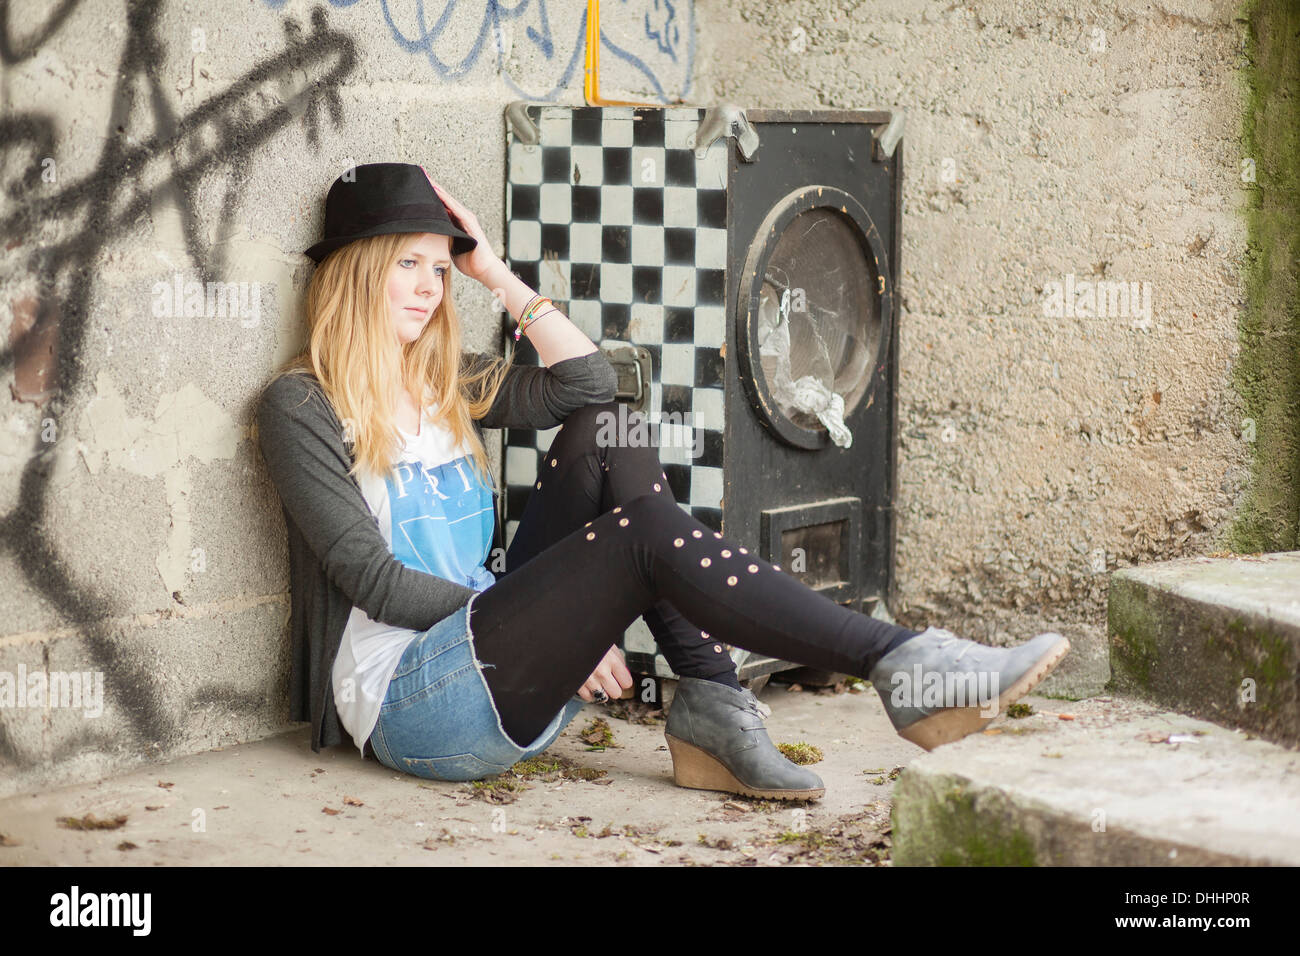 Young woman wearing a hat posing in front of a wall with graffiti, Hesse, Germany Stock Photo